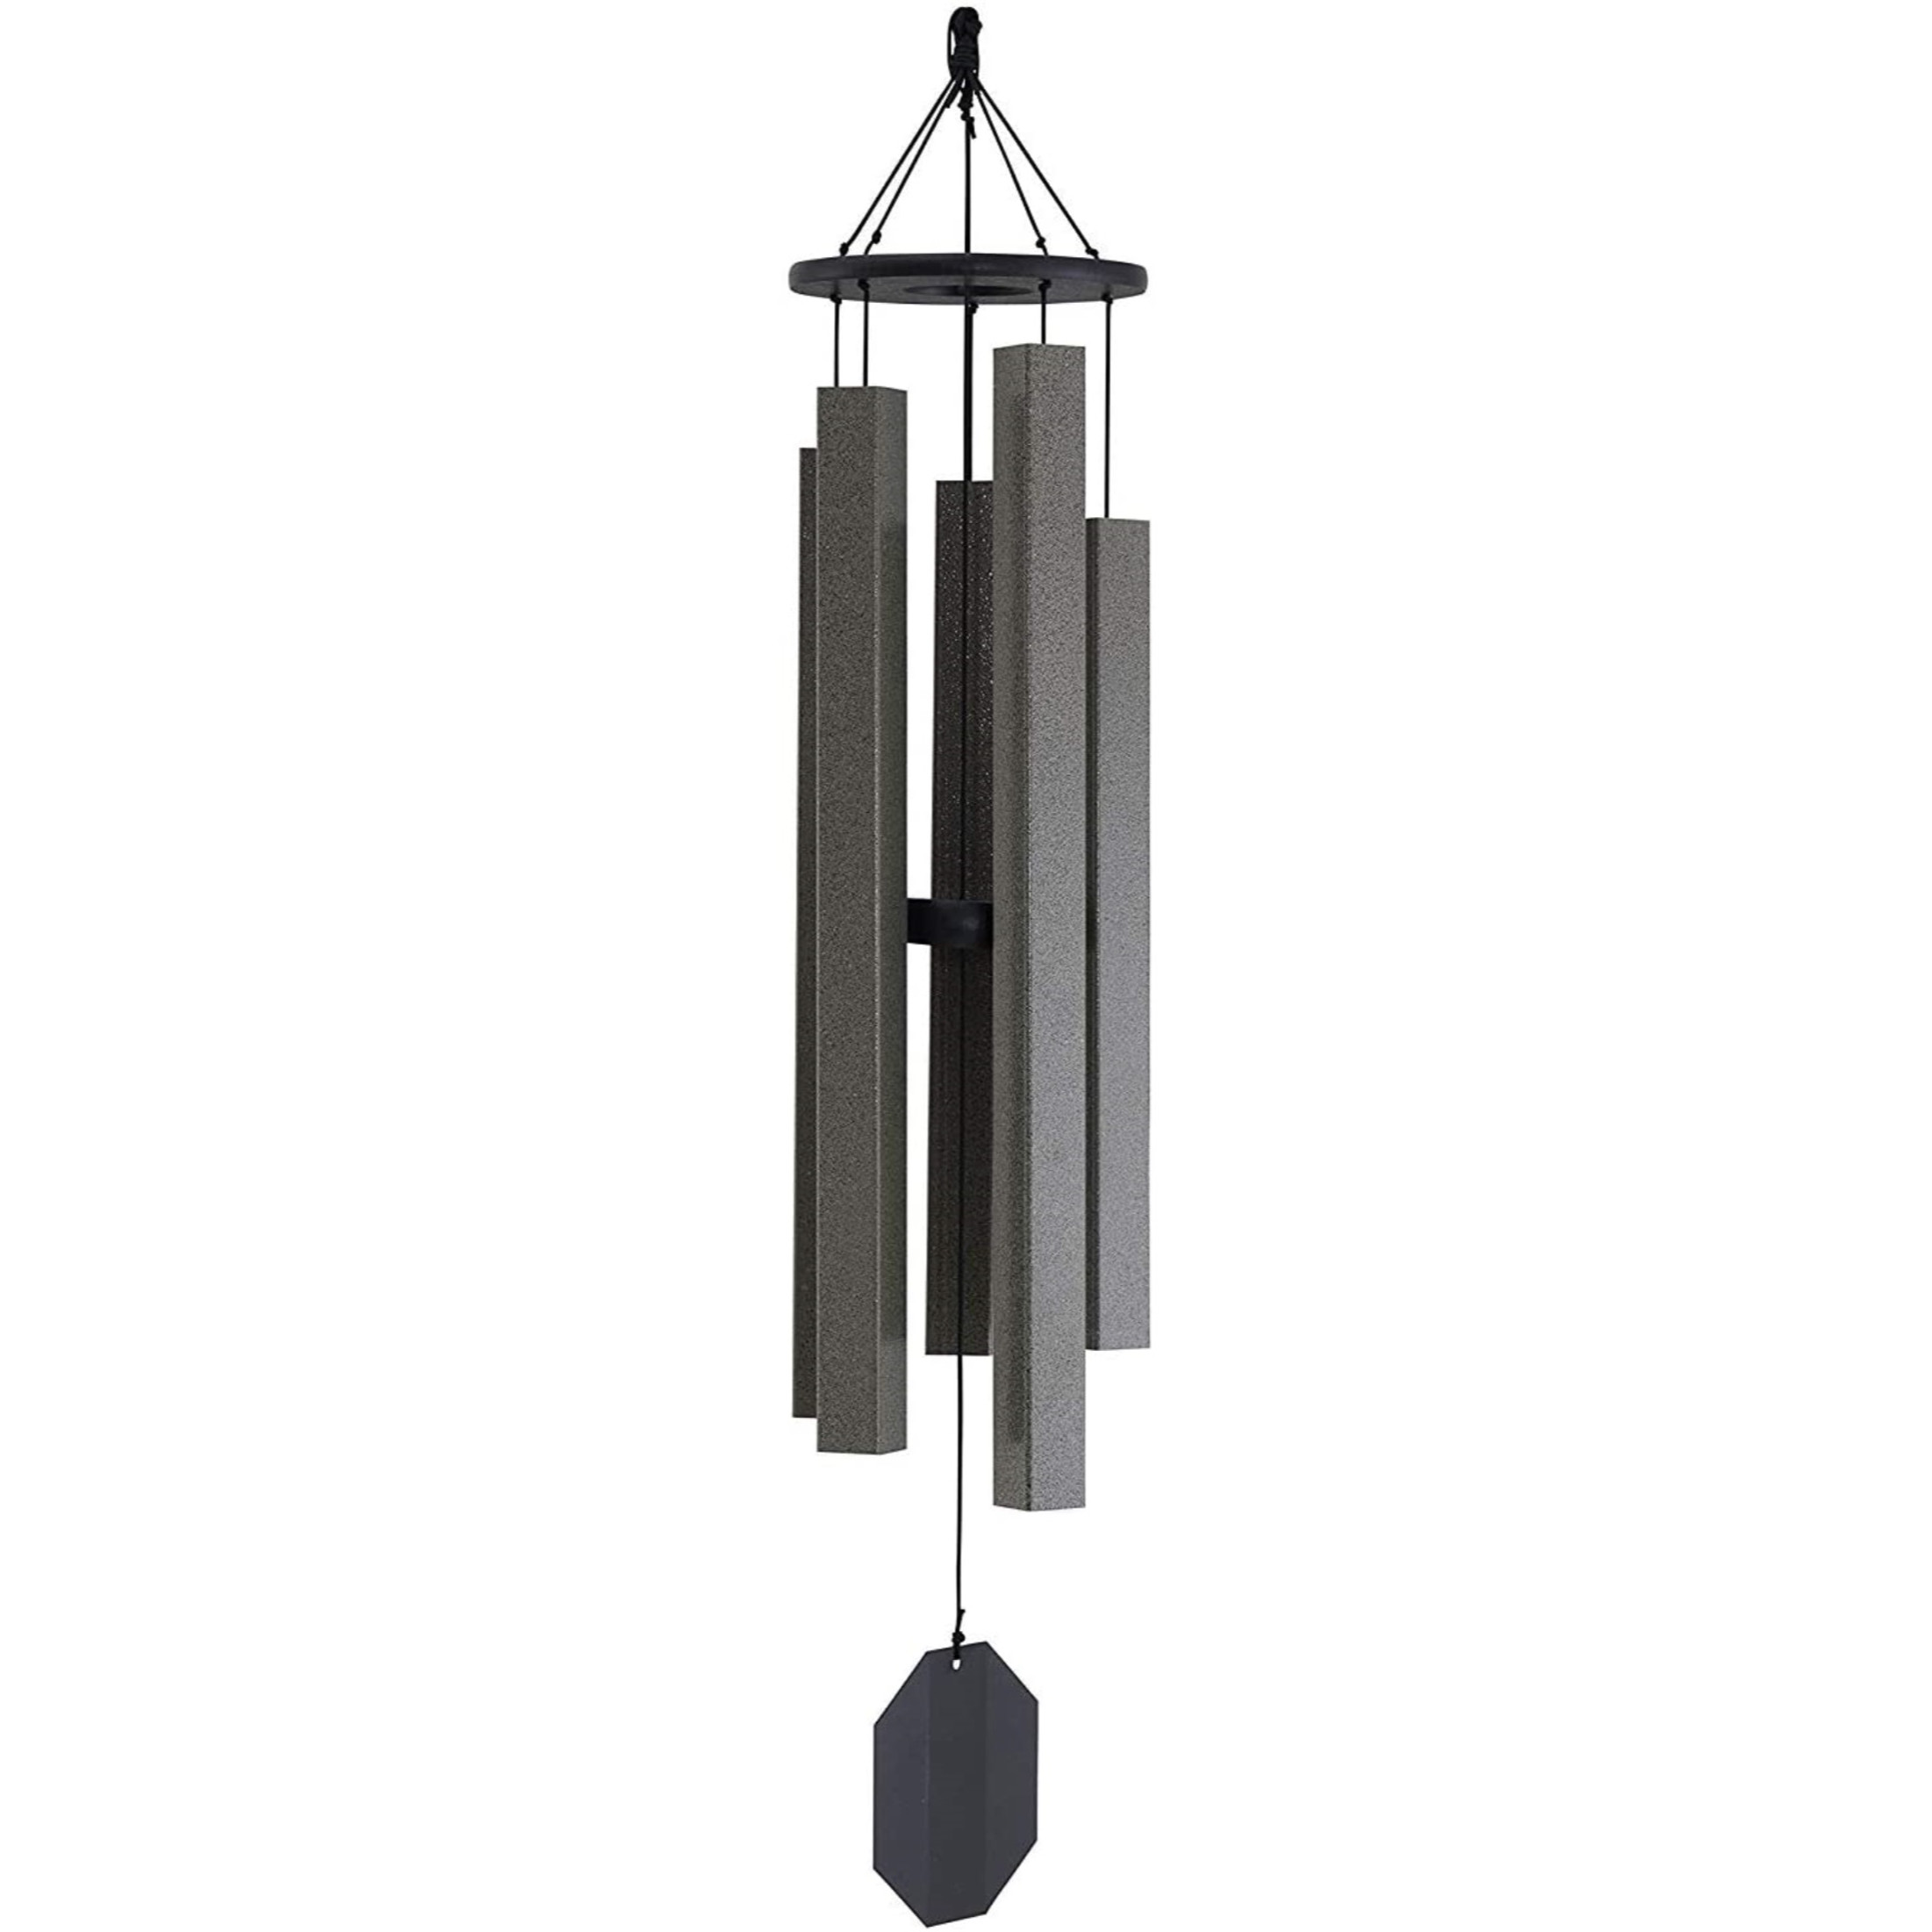 Lambright Country Chimes Alpine Whisper Wind Chime - Amish Handcrafted, Mocha, 43"